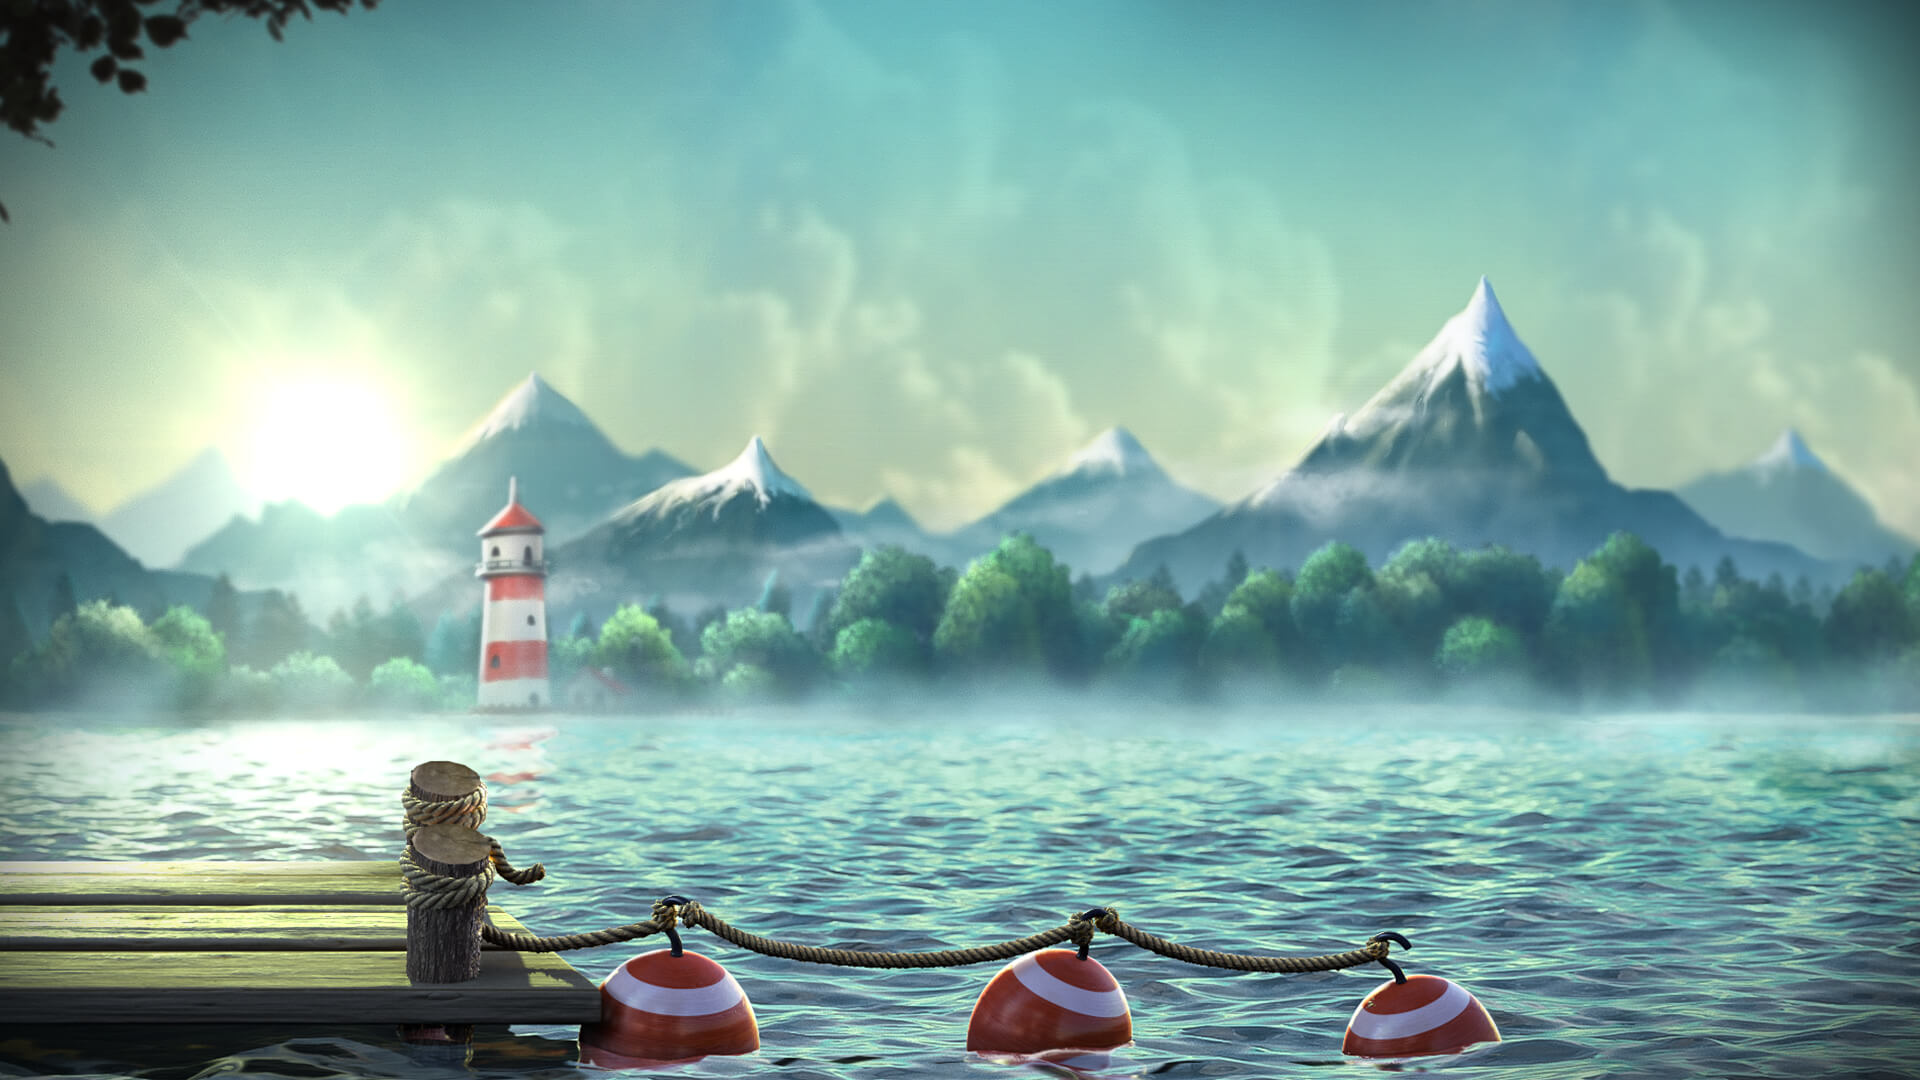 Game hight resolution background The Angler